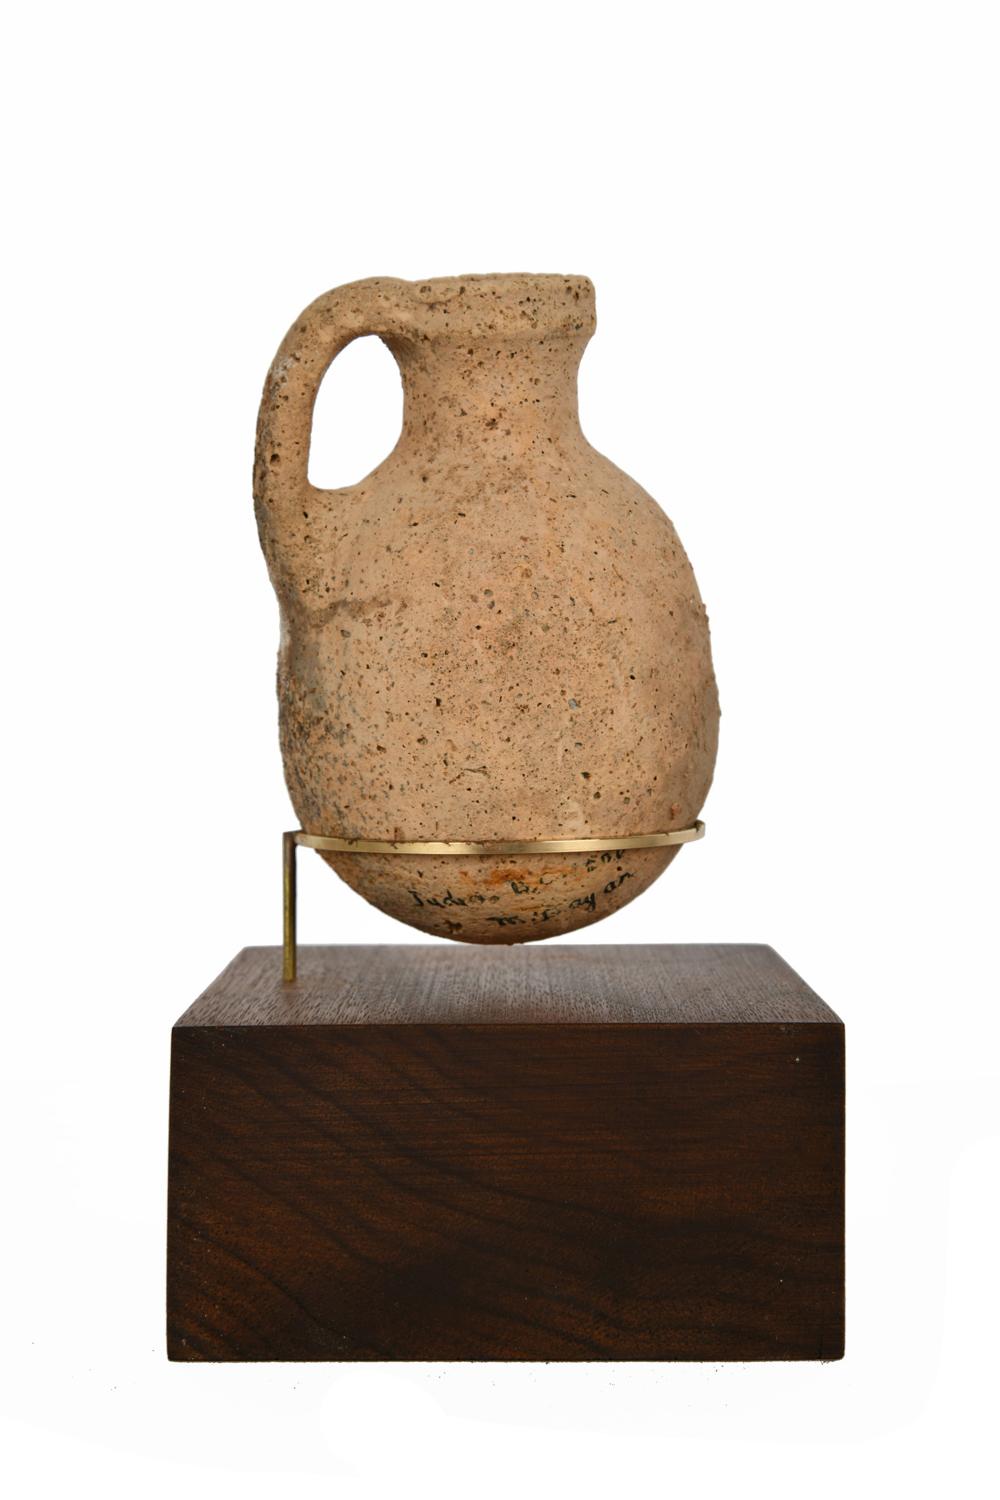 ARCHAIC STYLE POTTERY JUGpossibly Bronze